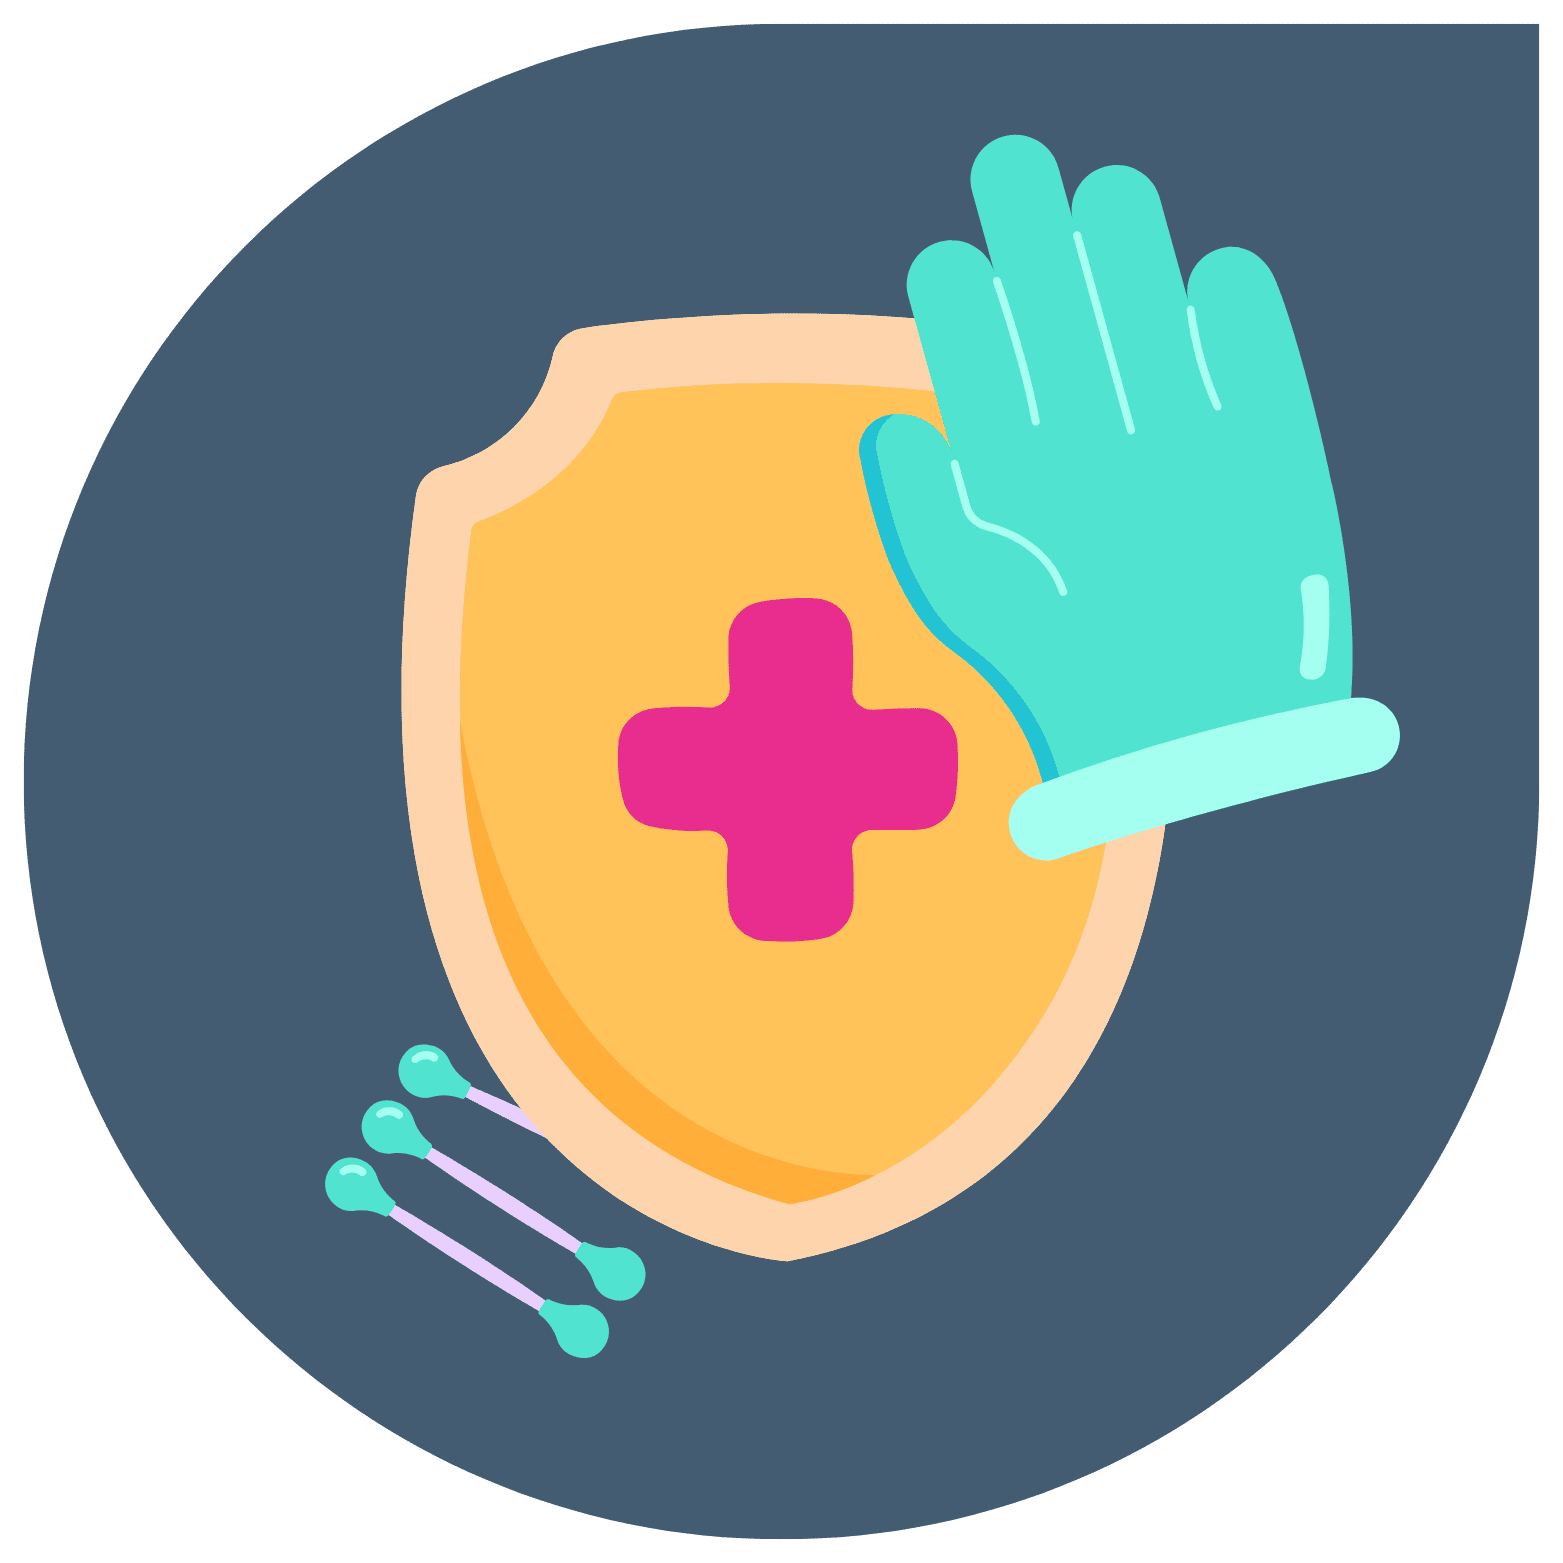 A round, navy blue background has various graphics inside: a teal medical glove and teal cotton swabs and a warm yellow guard icon with a hot pink medical symbol in its center